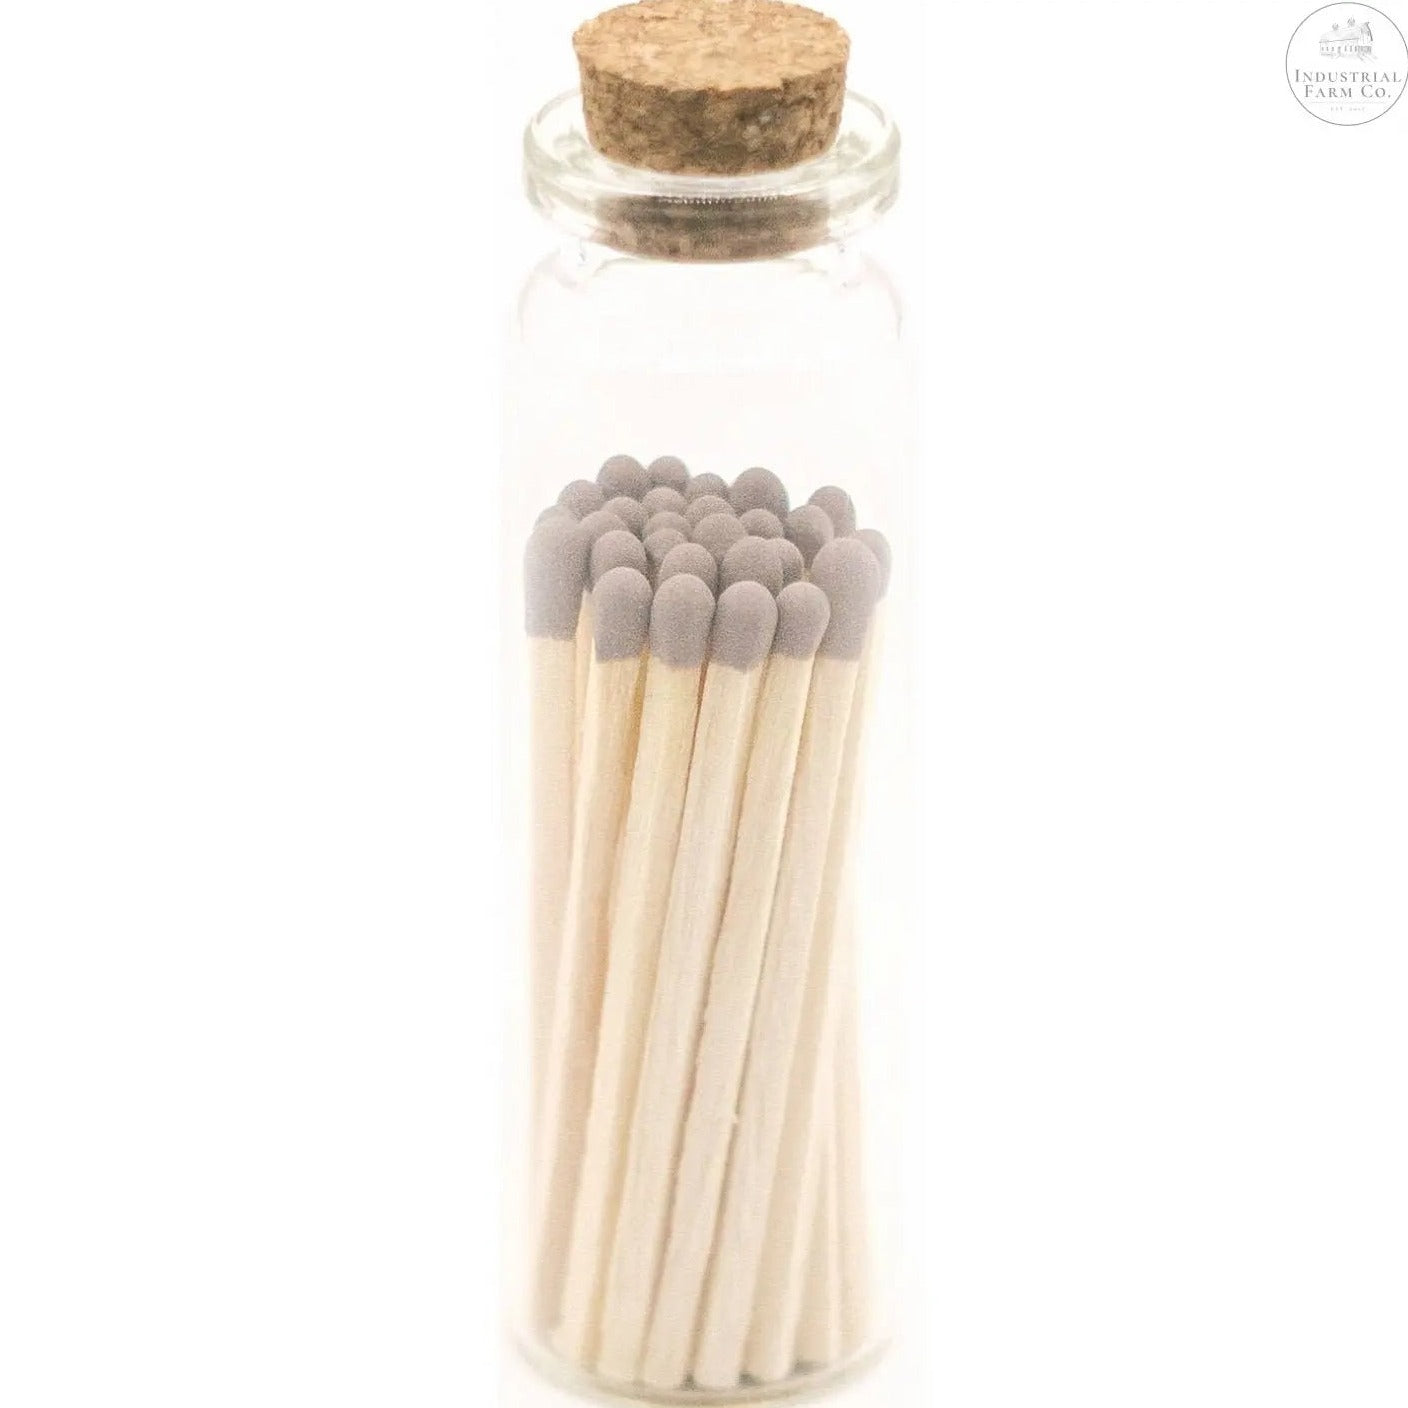 Decorative Mini Matches In Glass Container  Gray Tip   | Industrial Farm Co